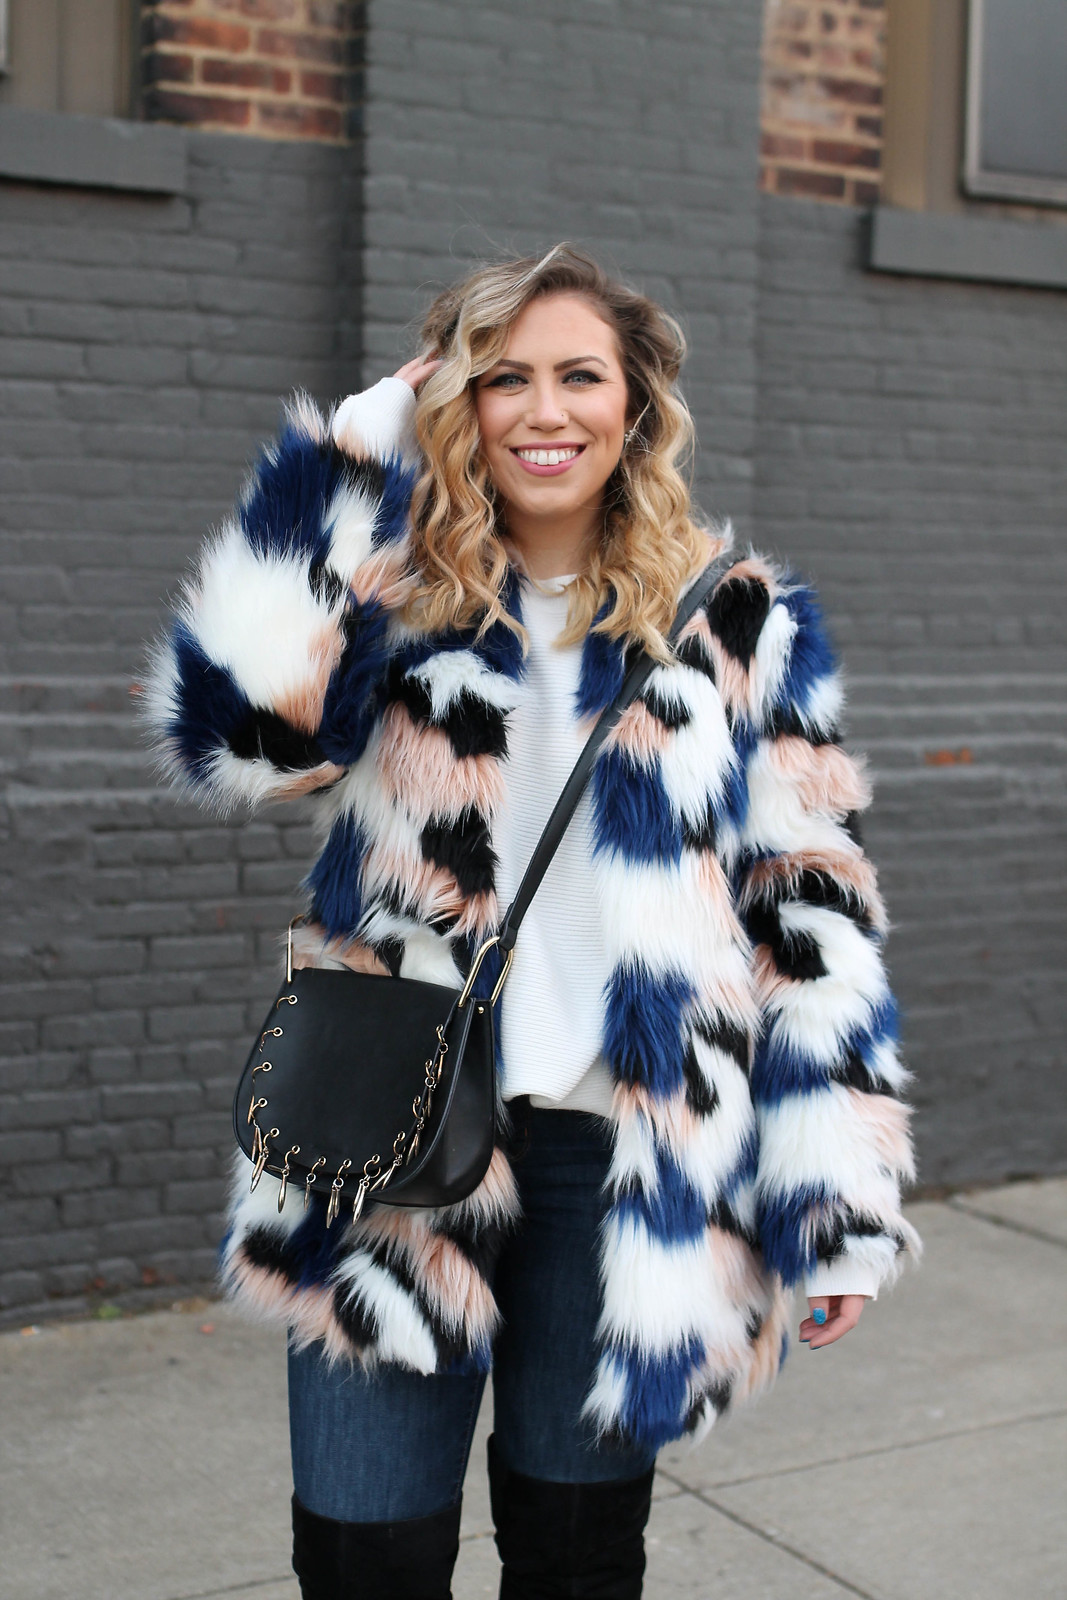 Shein Colorful Faux Fur Coat Blonde Curly Hair Winter Outfit Inspiration Statement Style Fashion